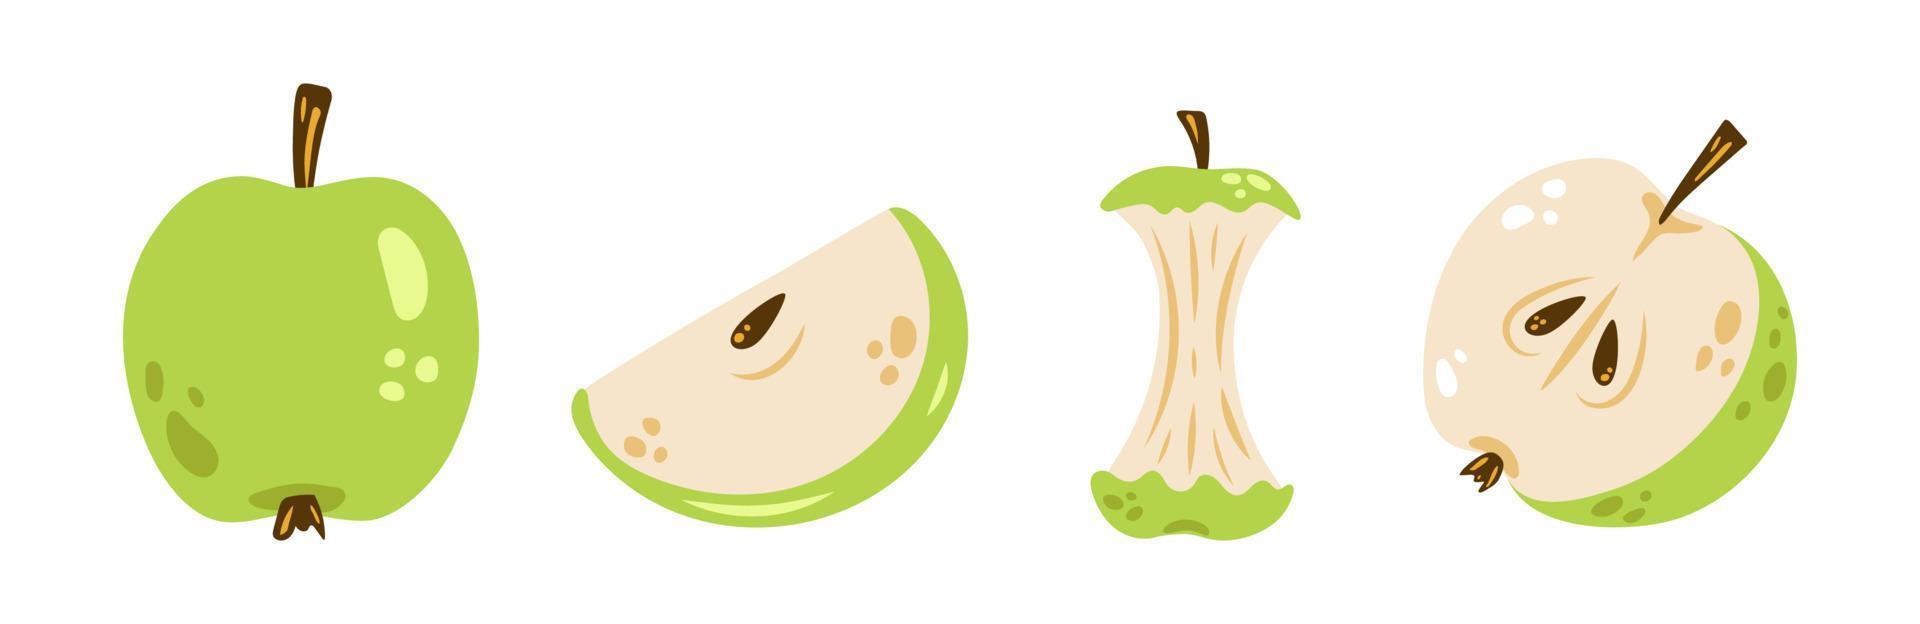 Vector apple set. Cute green apples in flat design. Colorful collection of whole apple, apple half, slice and apple core.